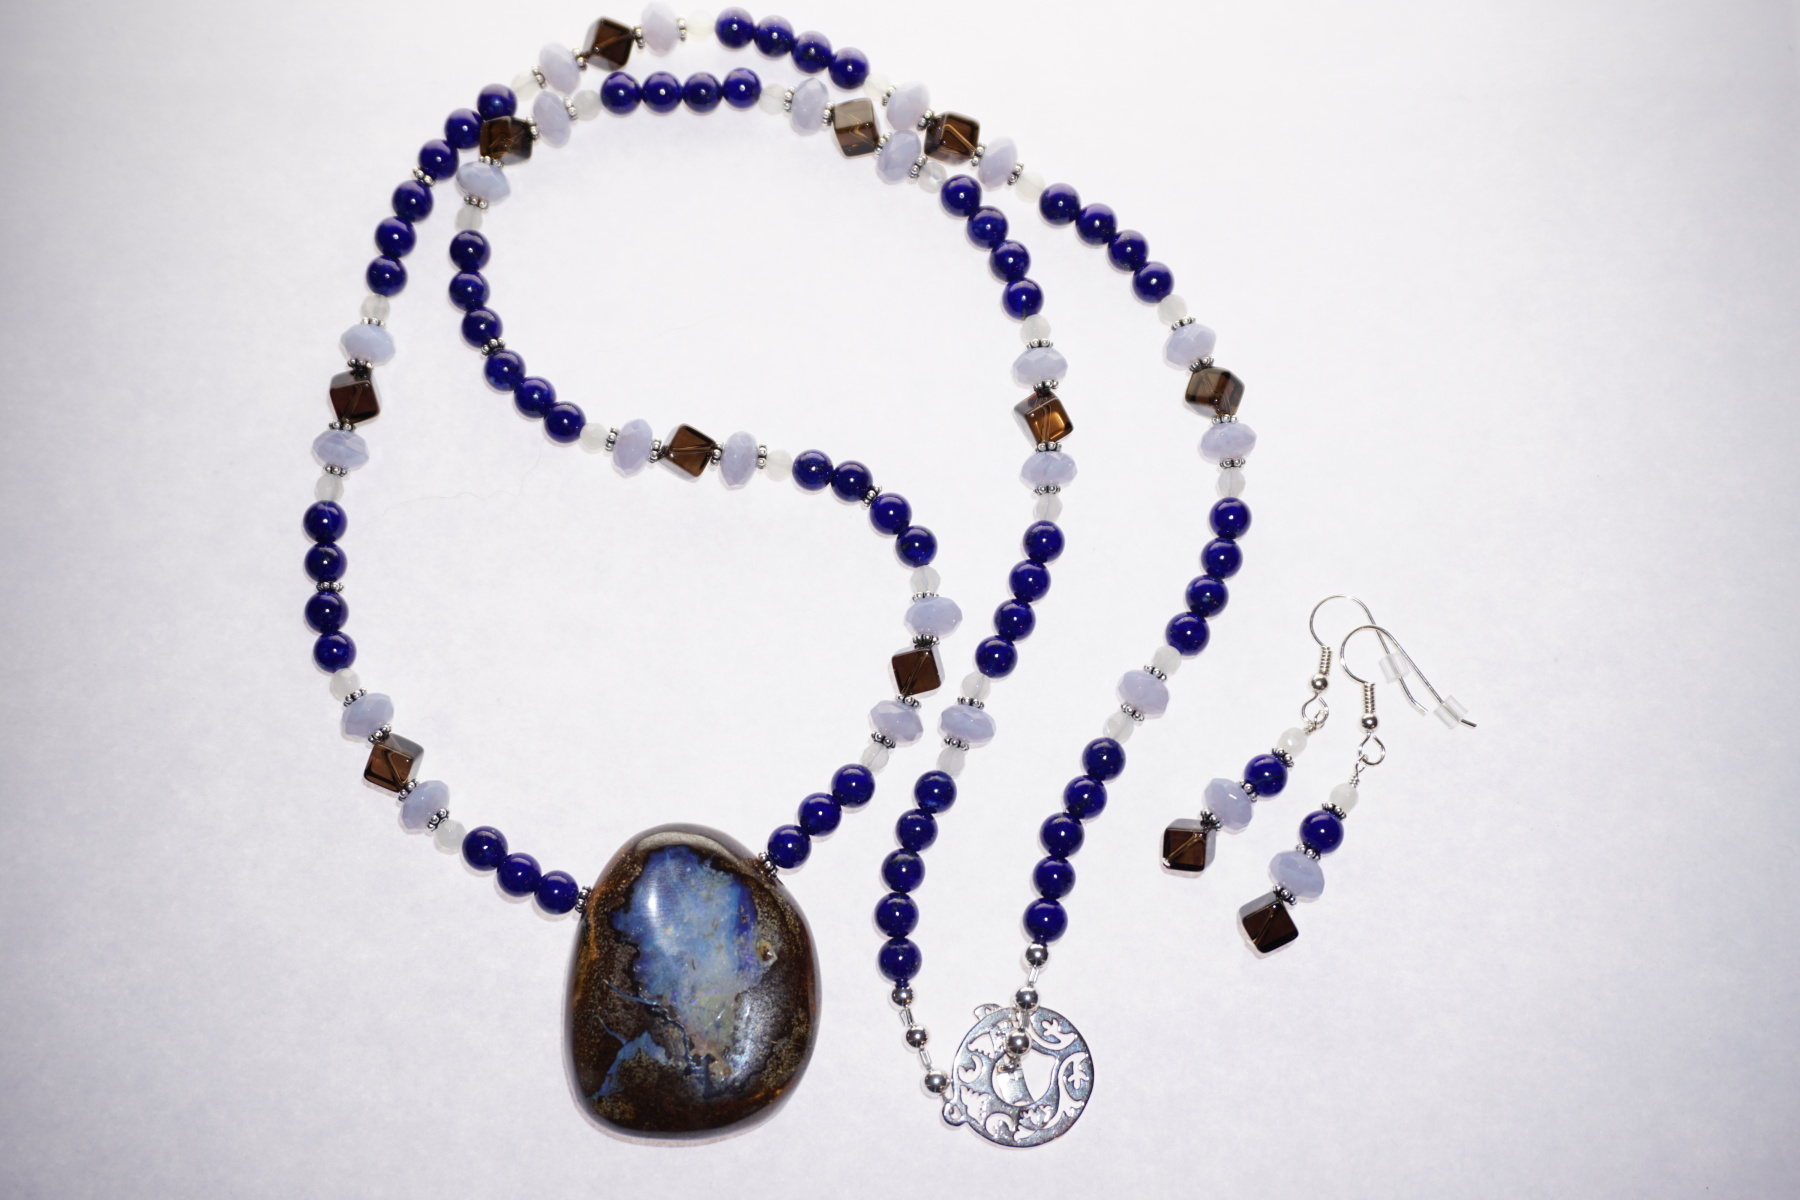 Scaled image DSC00158.JPG: Bolder Opal drop, Lapis, Quartz, Blue Chalcedony, Smoky Quartz, Bali spacers, and Sterling Silver findings and clasp.� 